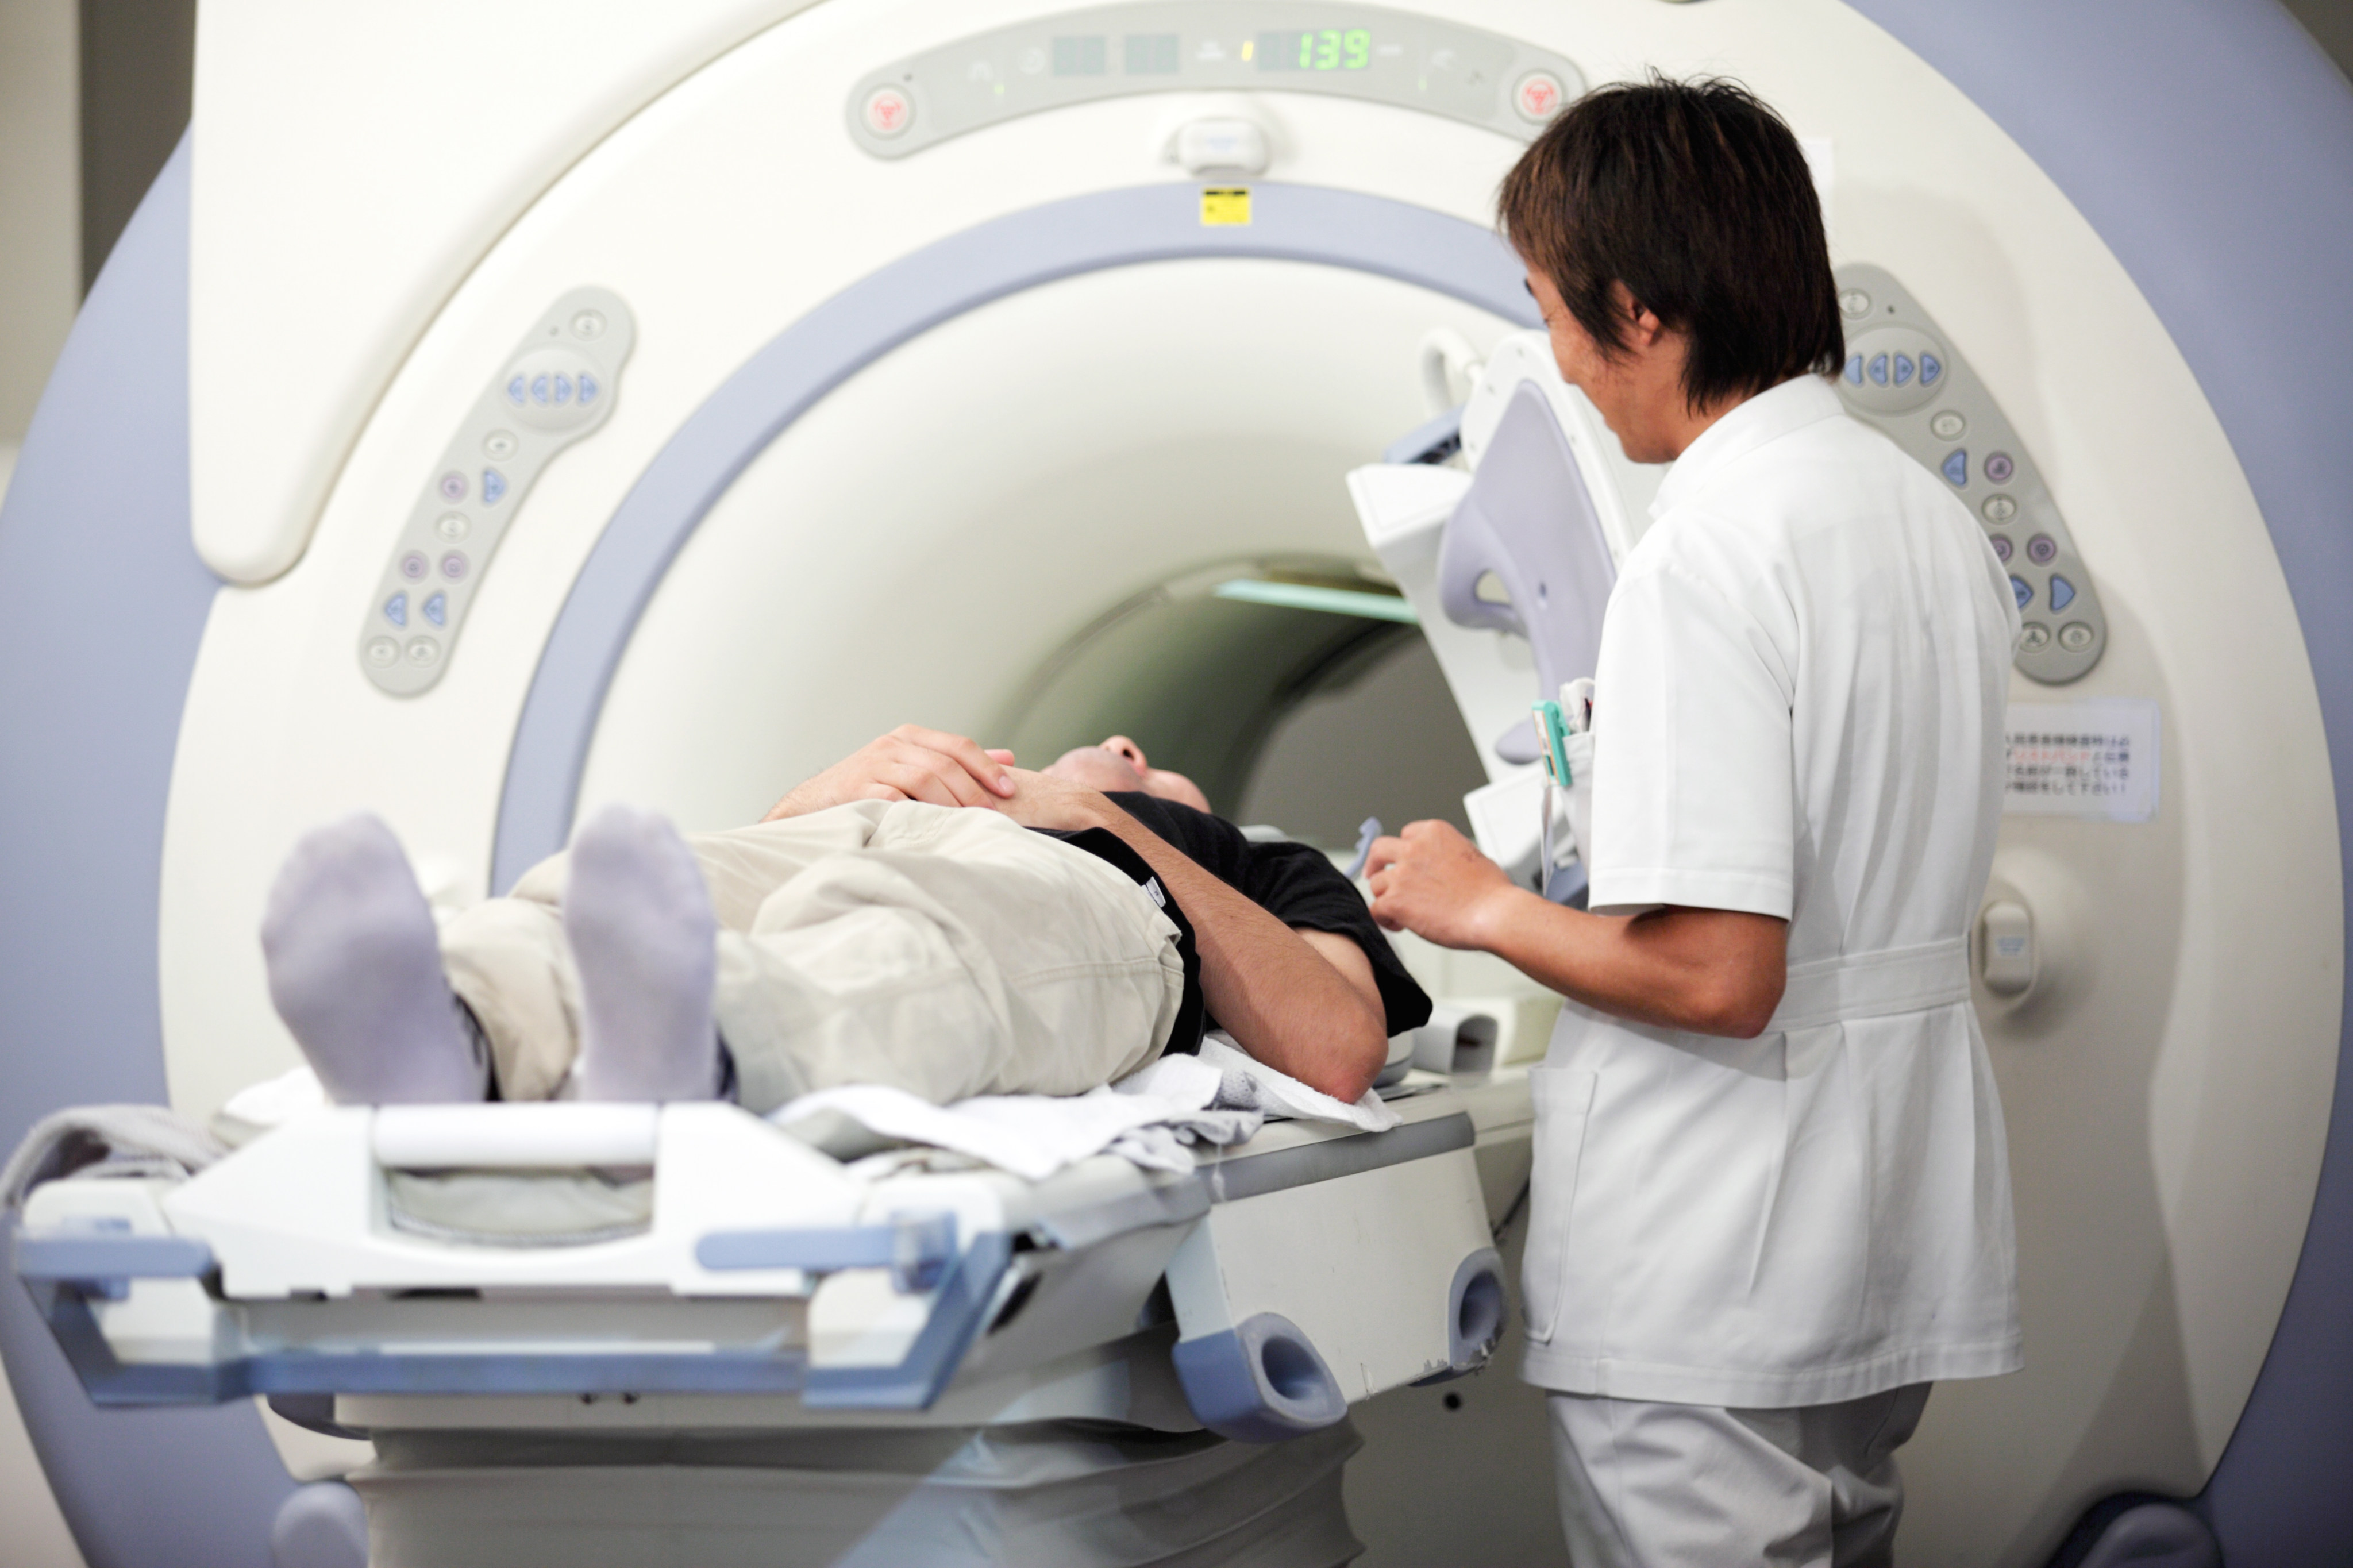 In China, medical uses account for around 20 per cent of the nuclear-technologies market. Photo: Shutterstock